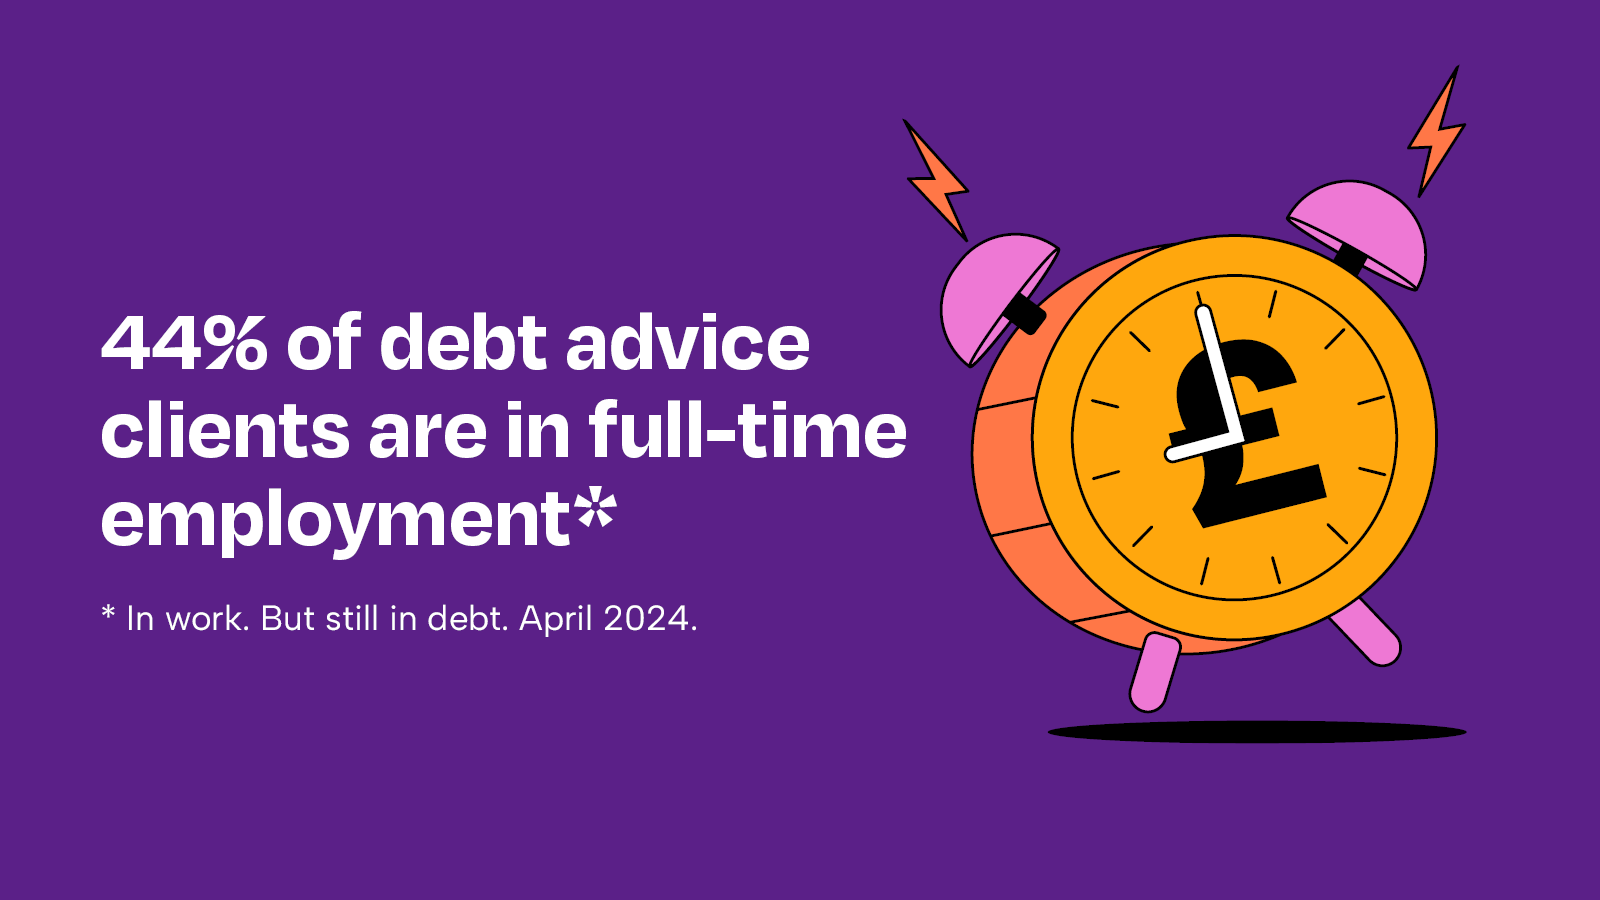 44% of debt advice clients are in full-time employment